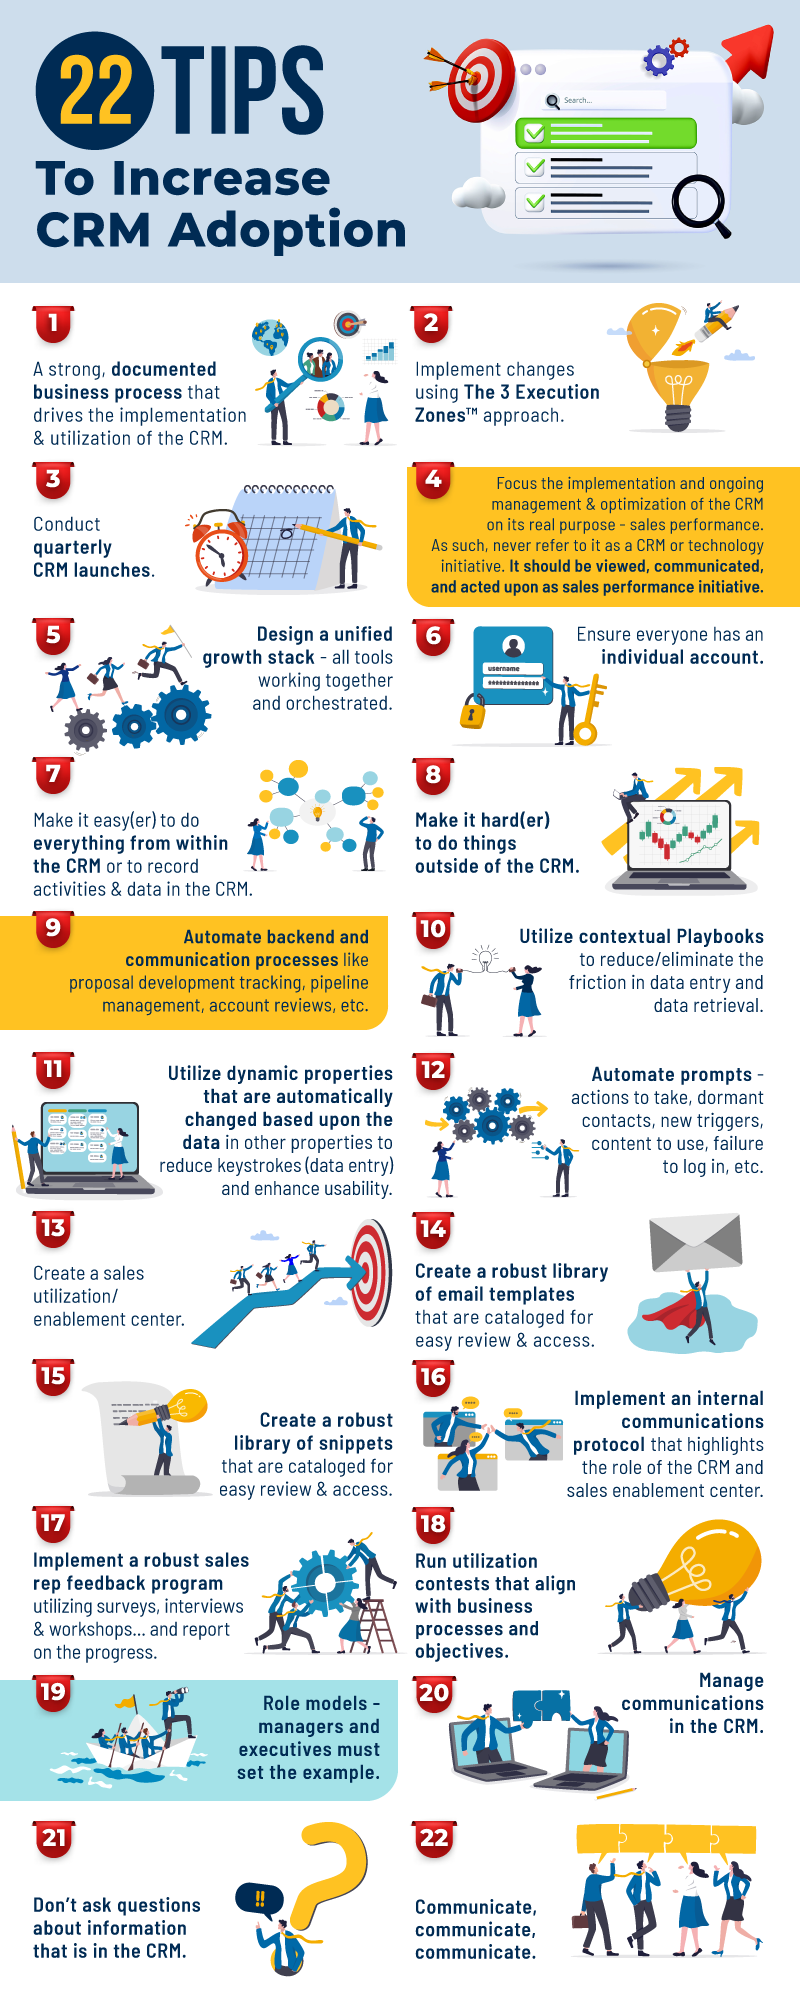 22 Tips for CRM Adoption Infographic